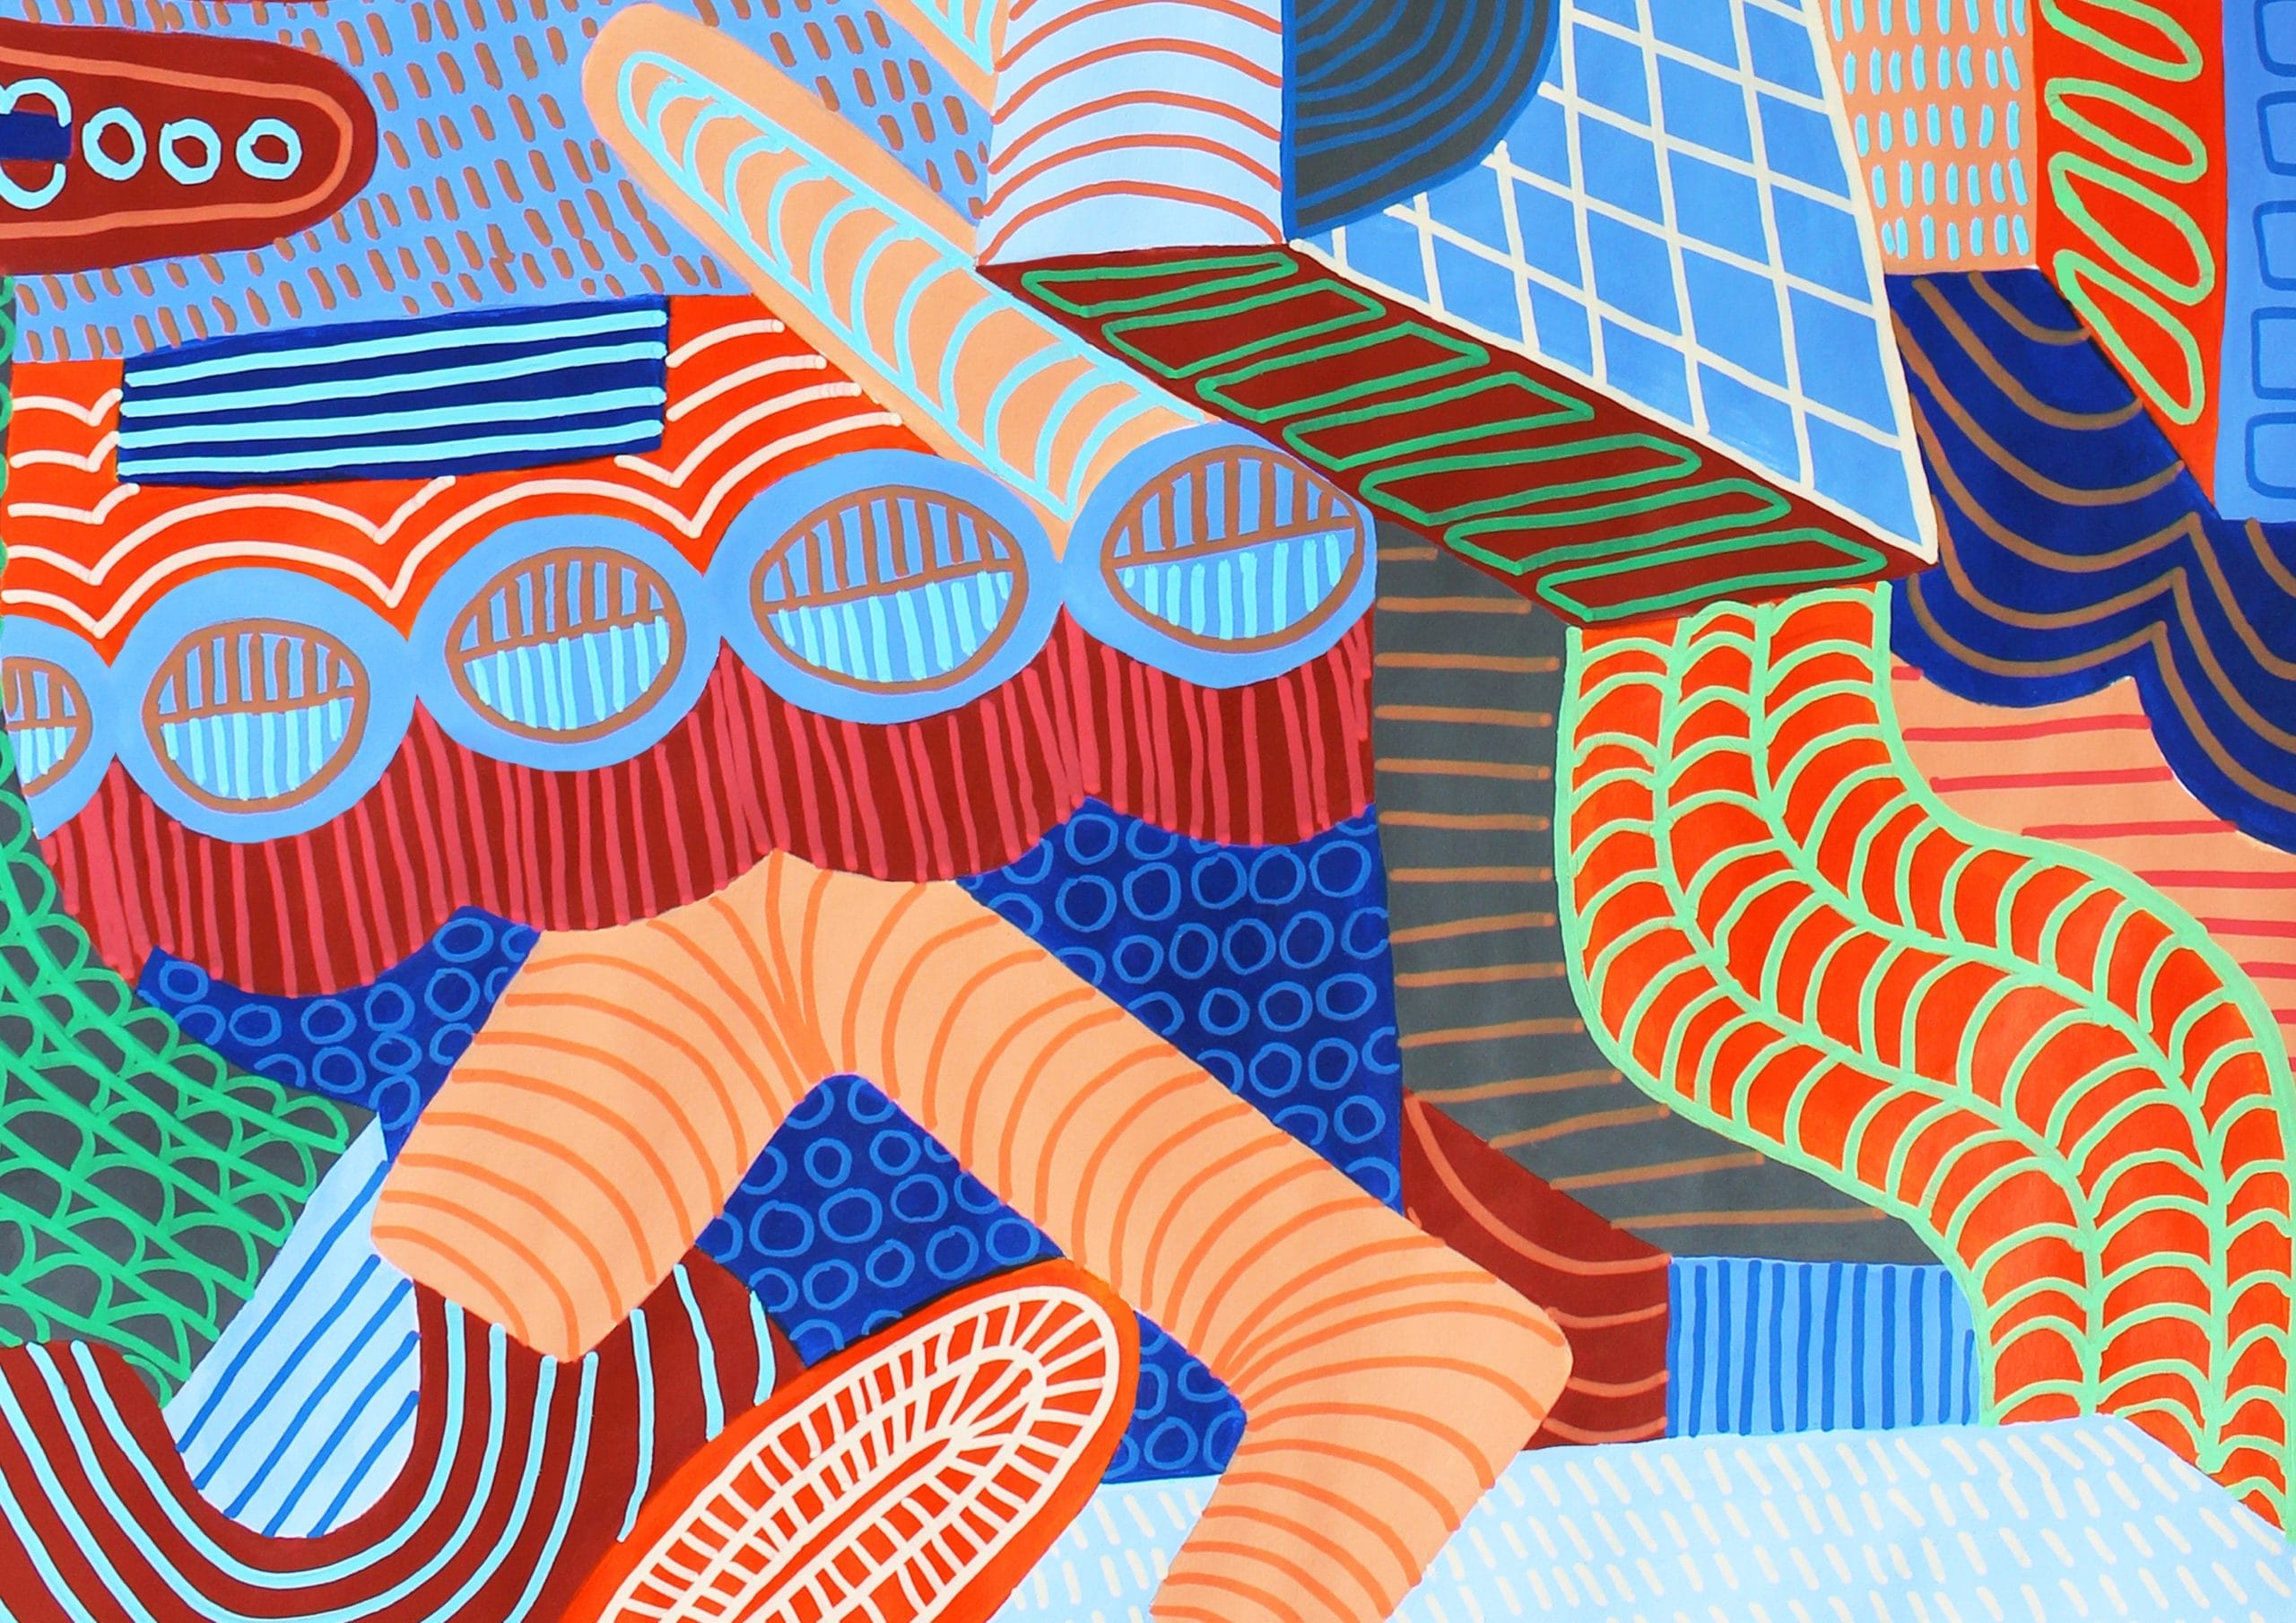 Abstract art piece by Georgie McEwan. Blue, orange and red shapes overlap and converge, overlapping with curving and geometric lines.